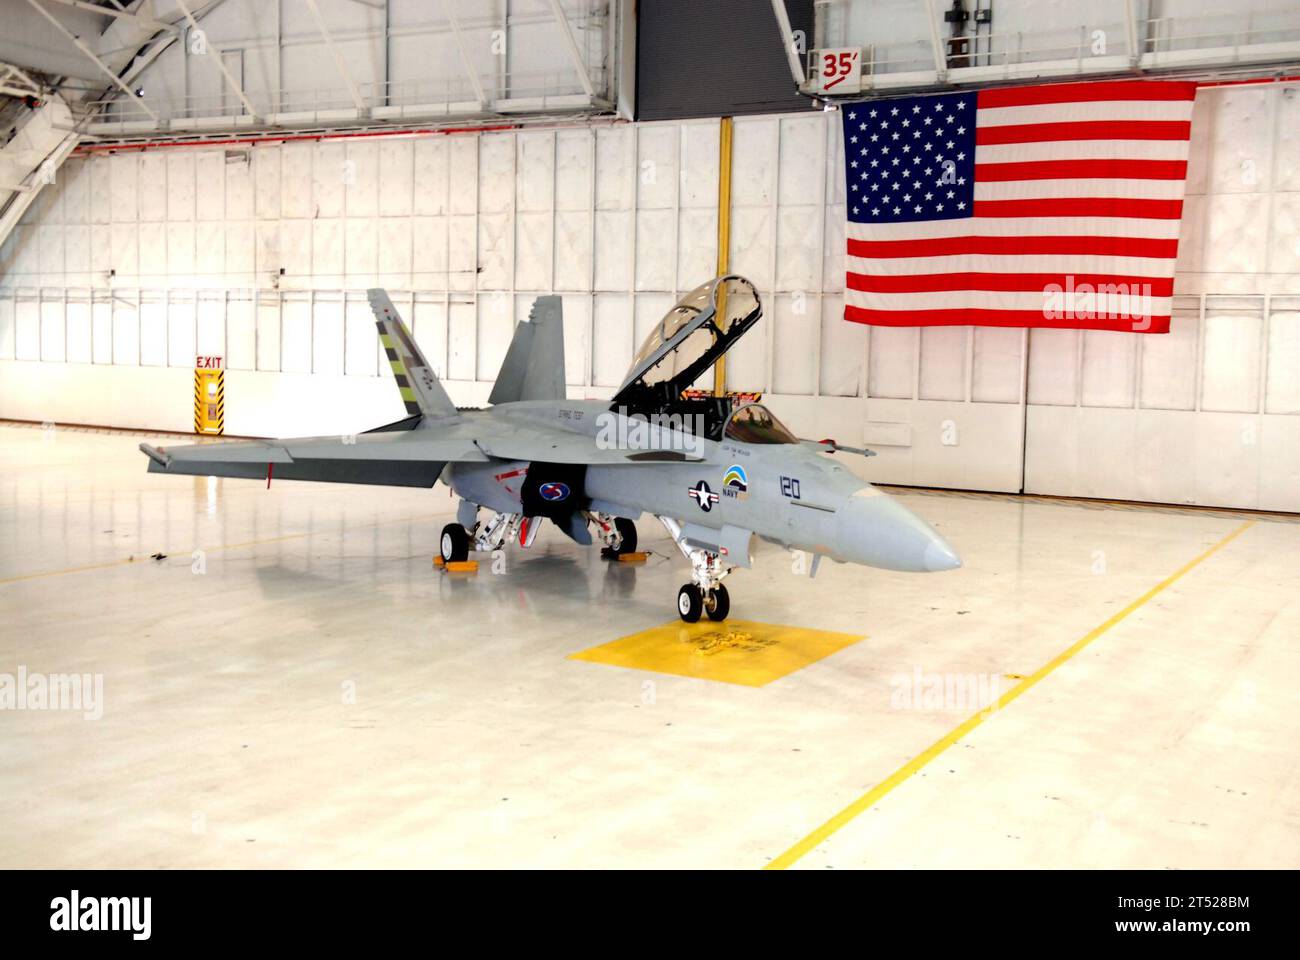 1003309565D-078 ANDREWS AFB, Md. (March 30, 2010) An F/A-18 Super Hornet from Air Test and Evaluation Squadron (VX) 23 with green markings and the U.S. Department of the Navy Energy Security logo is in the hangar at Andrews Air Force Base. VX-23 will be testing the full envelope of the Super Hornet with a drop in replacement biofuel made from the camelina plant in an effort to certify alternative fuels for naval aviation use. Navy Stock Photo